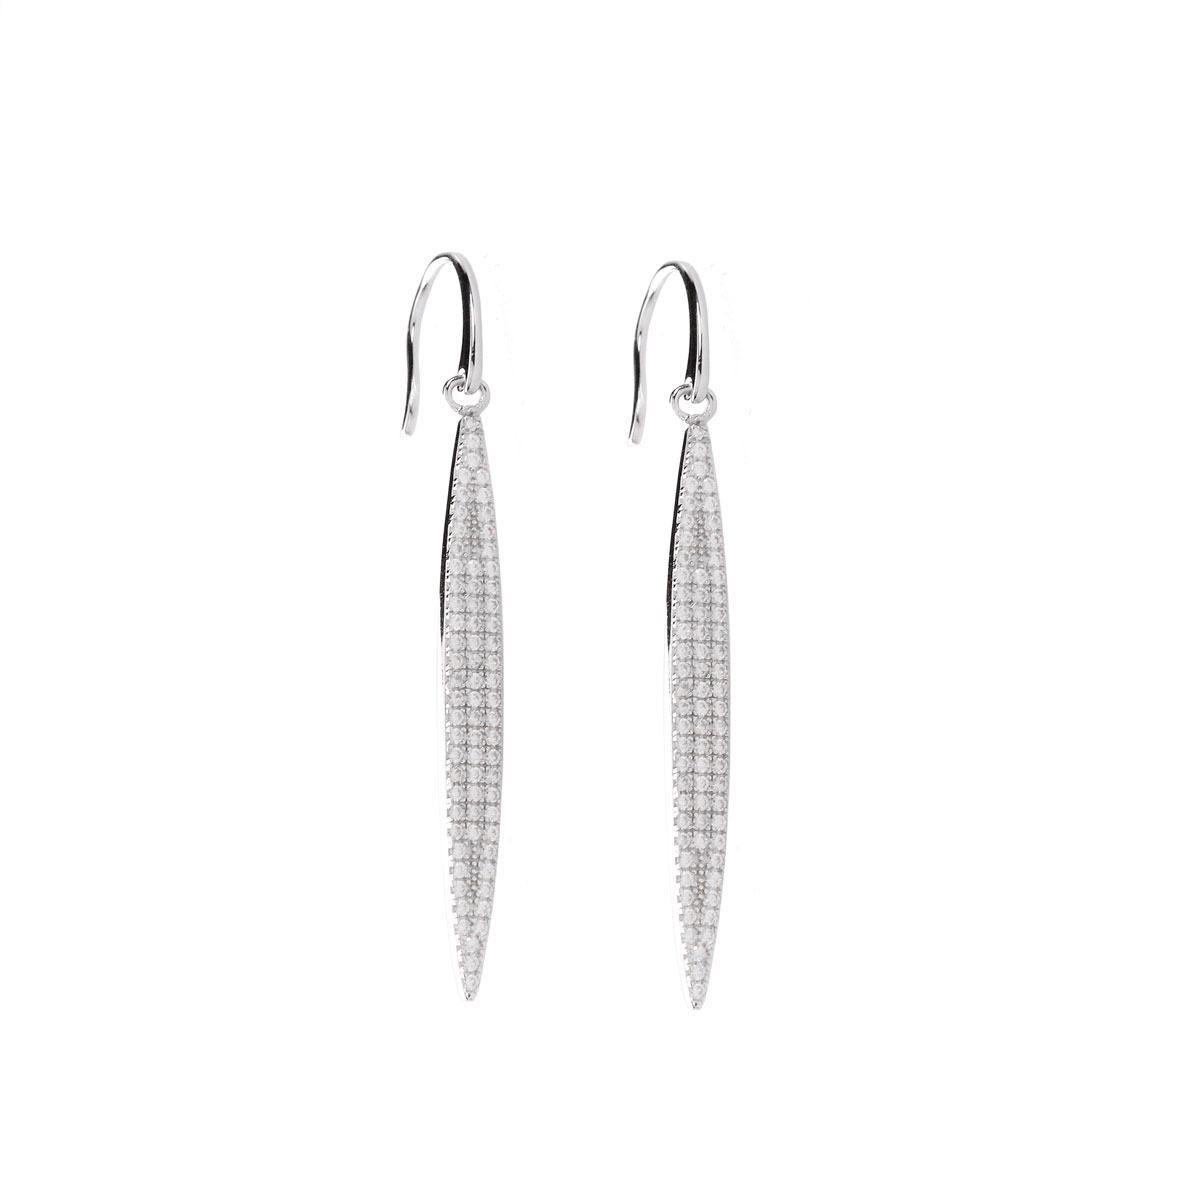 Cashs Ireland, Silver and Crystal Feather Pierced Earrings